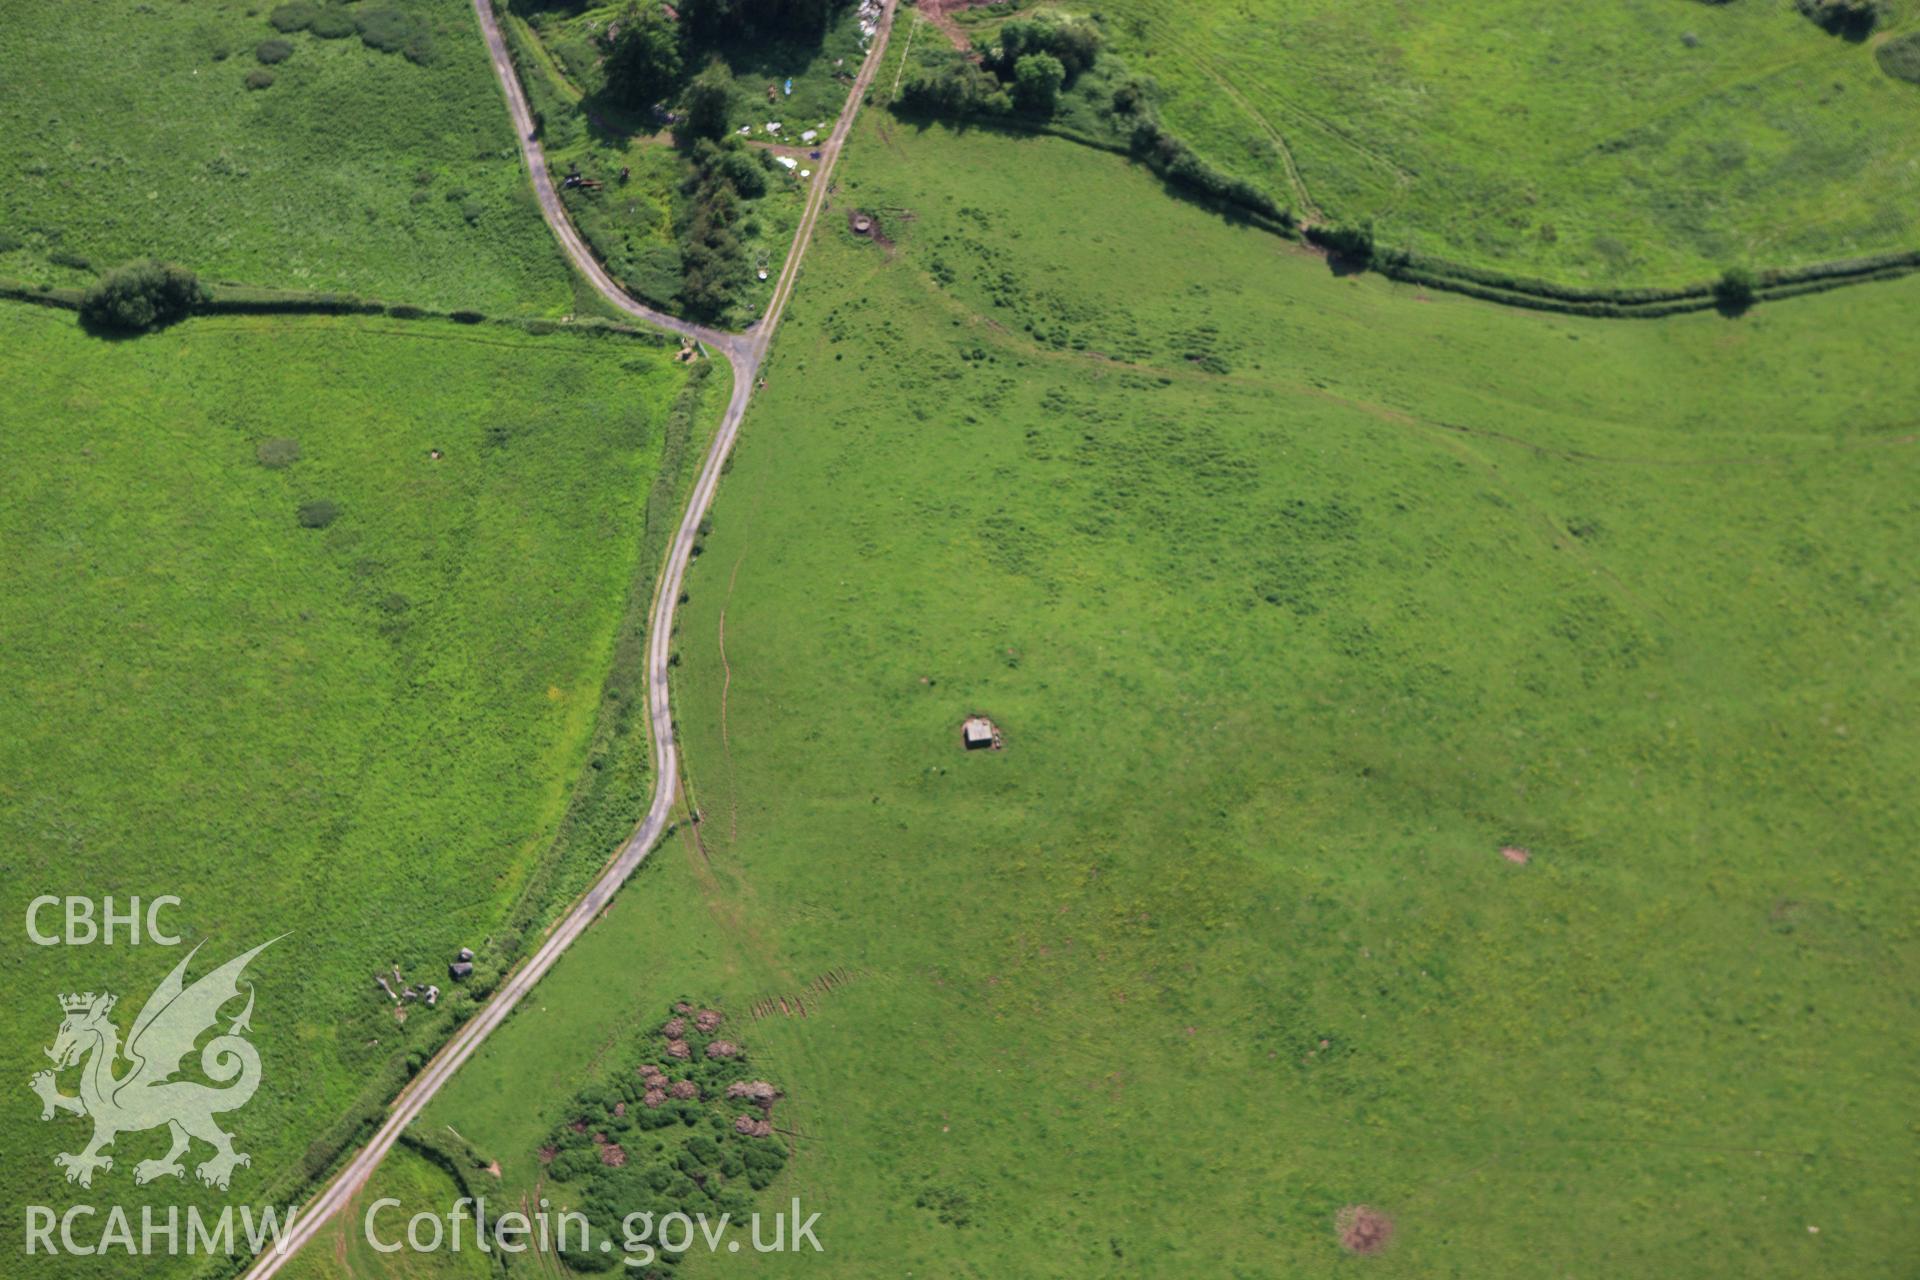 RCAHMW colour oblique aerial photograph of Civil War siege earthworks to the north-east of Raglan Castle. Taken on 11 June 2009 by Toby Driver